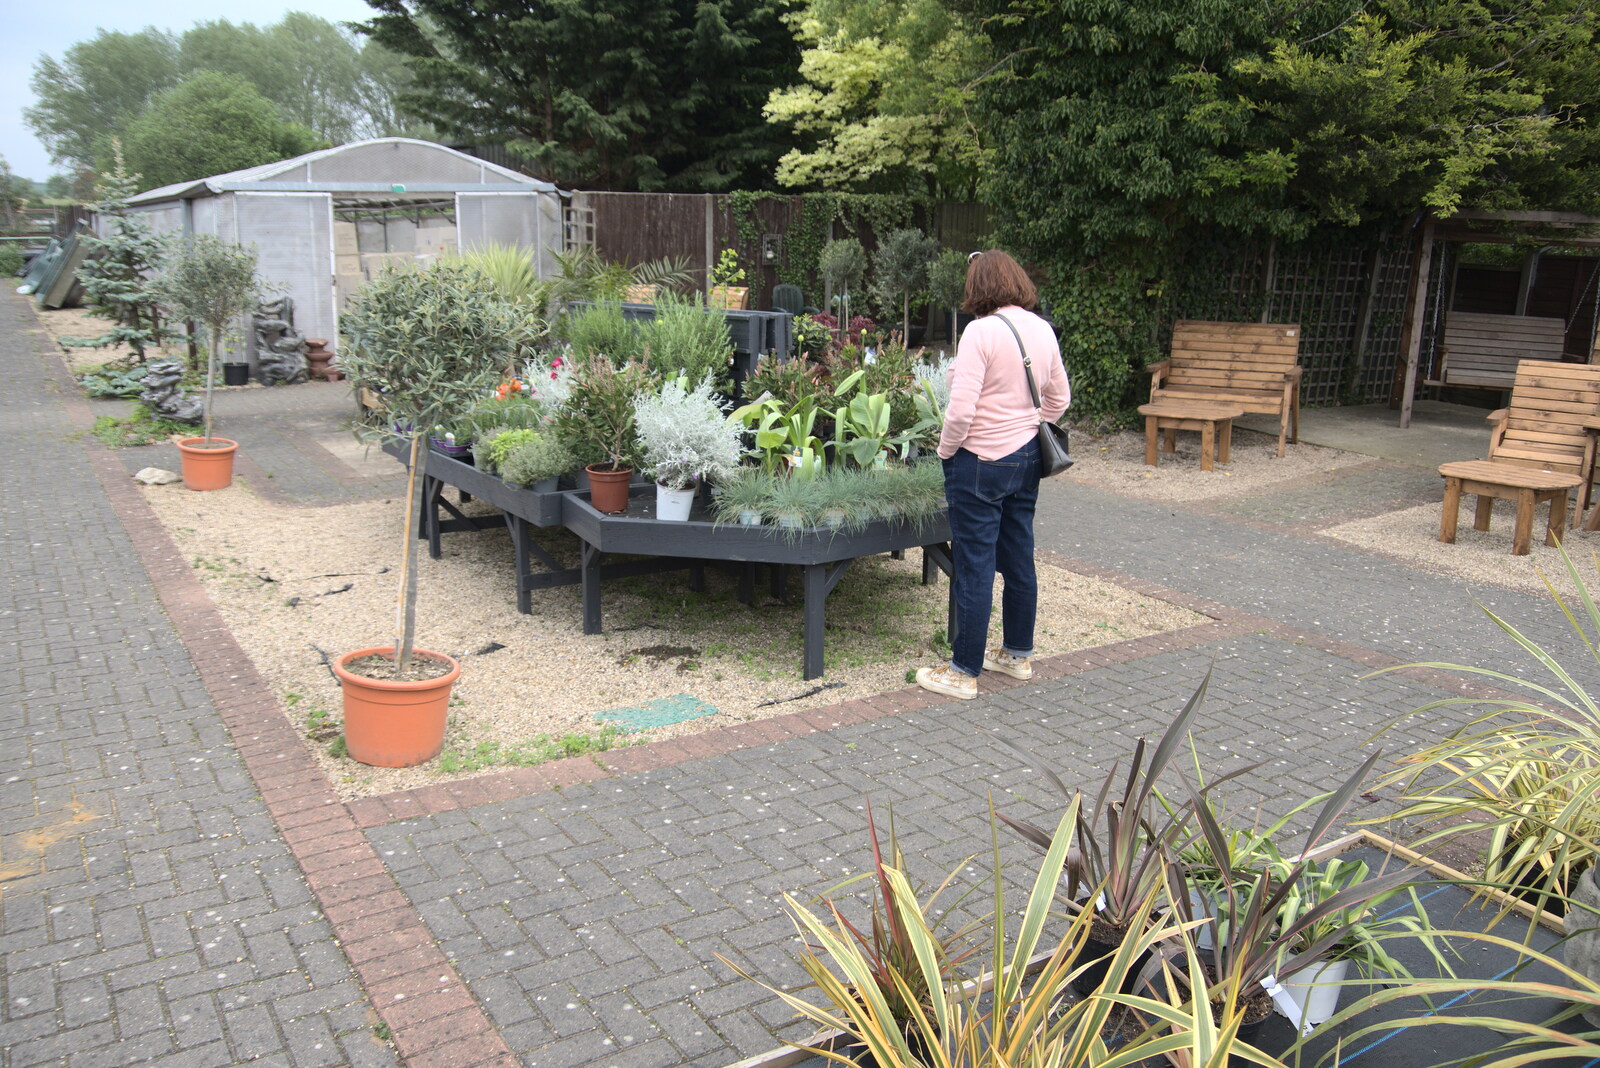 Isobel looks at plants from The BSCC at Burston and The Legend of Swallow Aquatics, East Harling, Norfolk - 15th May 2022